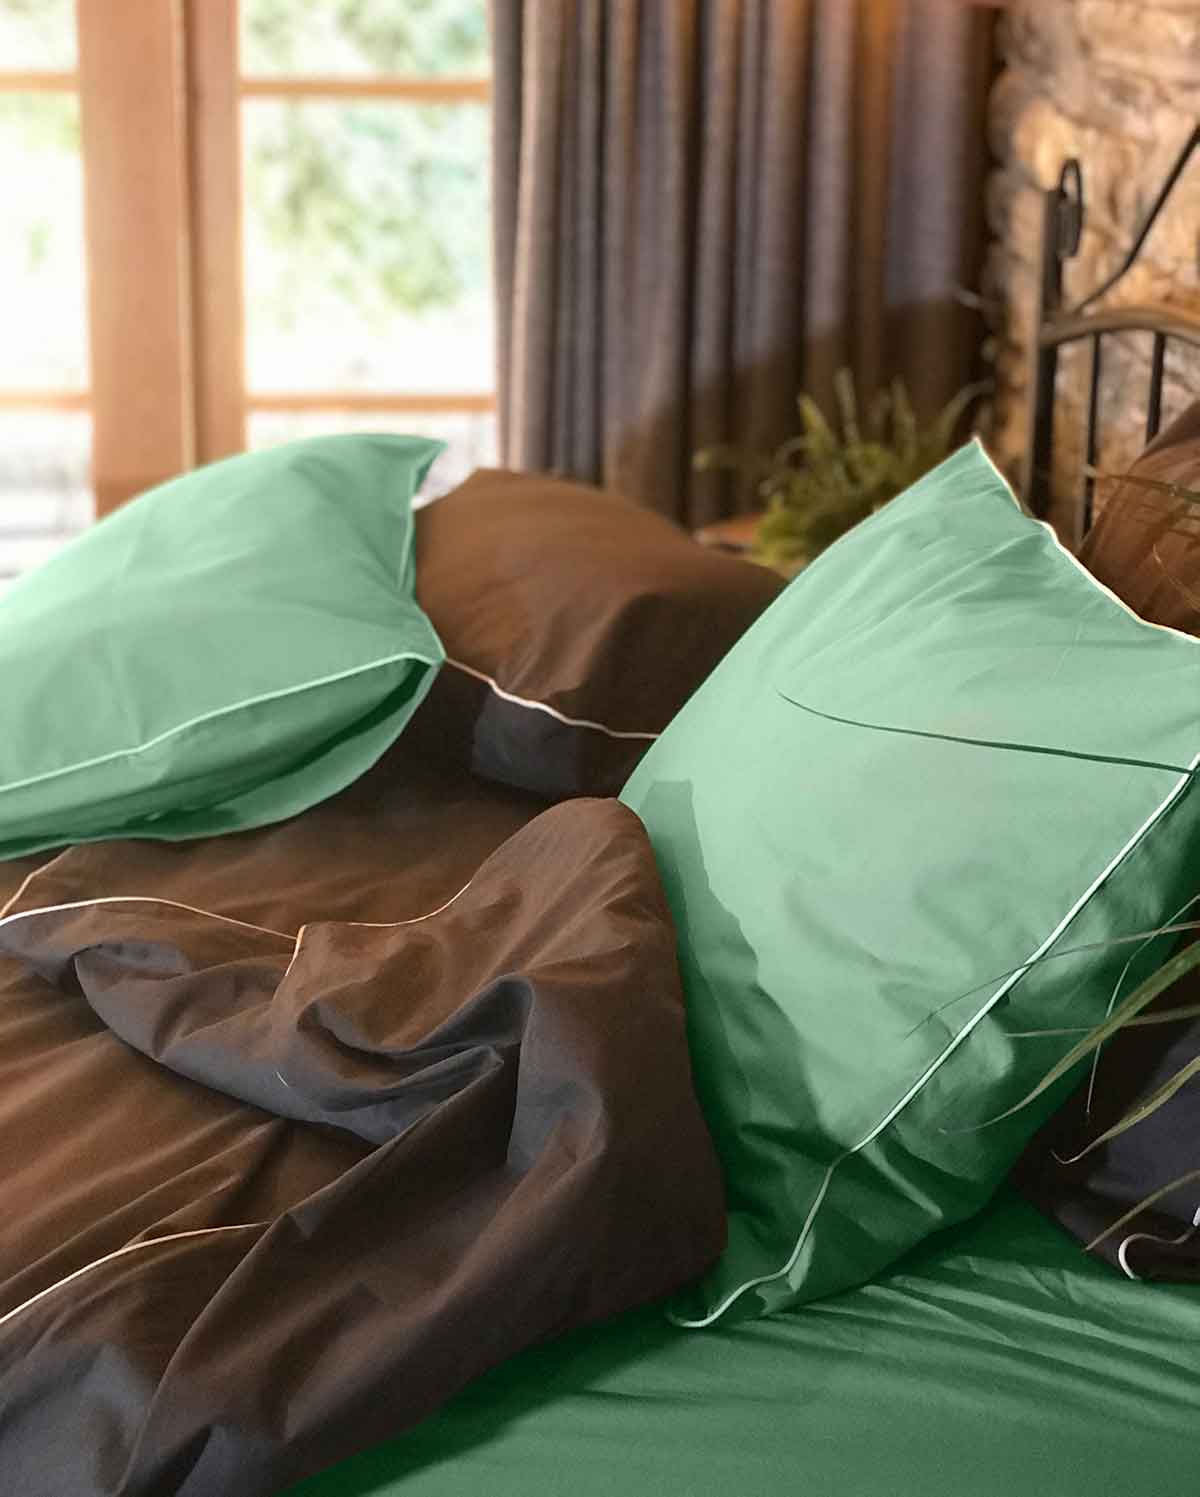 Classic Percale - Core Bedding Set - Jade Green with White Piped Edge